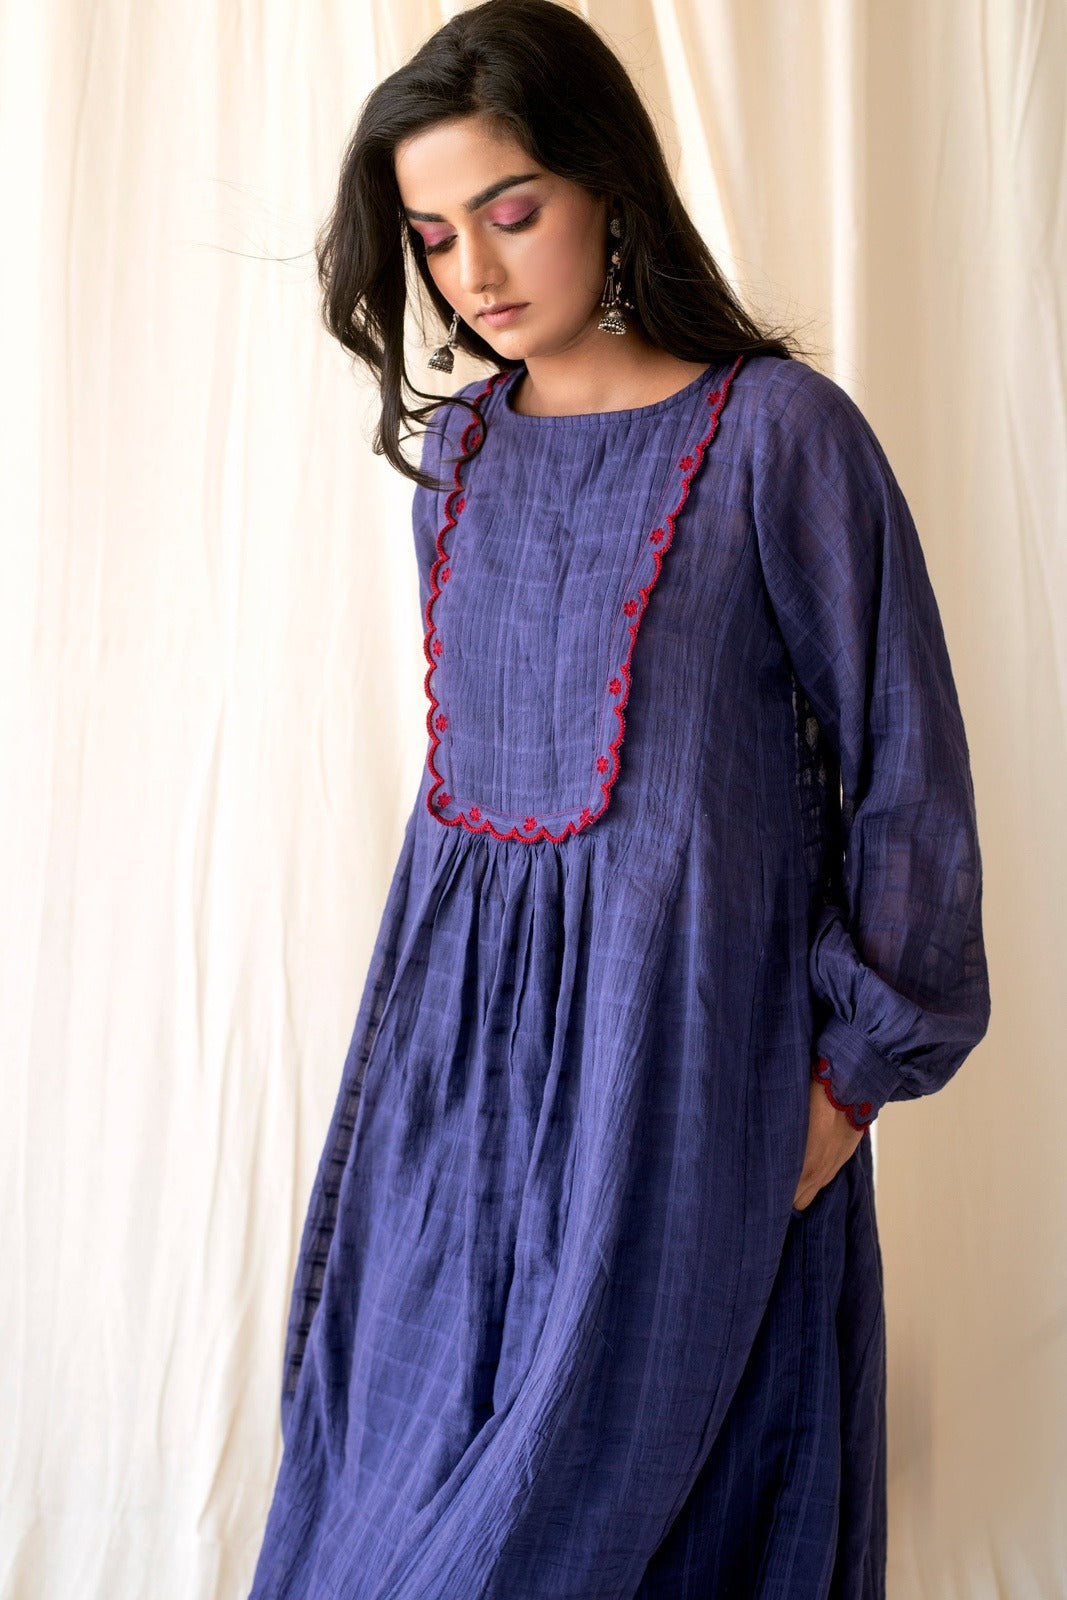 Amethyst Set at Kamakhyaa by Taro. This item is Best Selling, Blue, Checks, Cotton, Evening Wear, For Mother, Indian Wear, July Sale, July Sale 2023, Kurta Palazzo Sets, Natural, Regular Fit, Rozana Taro, Wedding Gifts, Womenswear